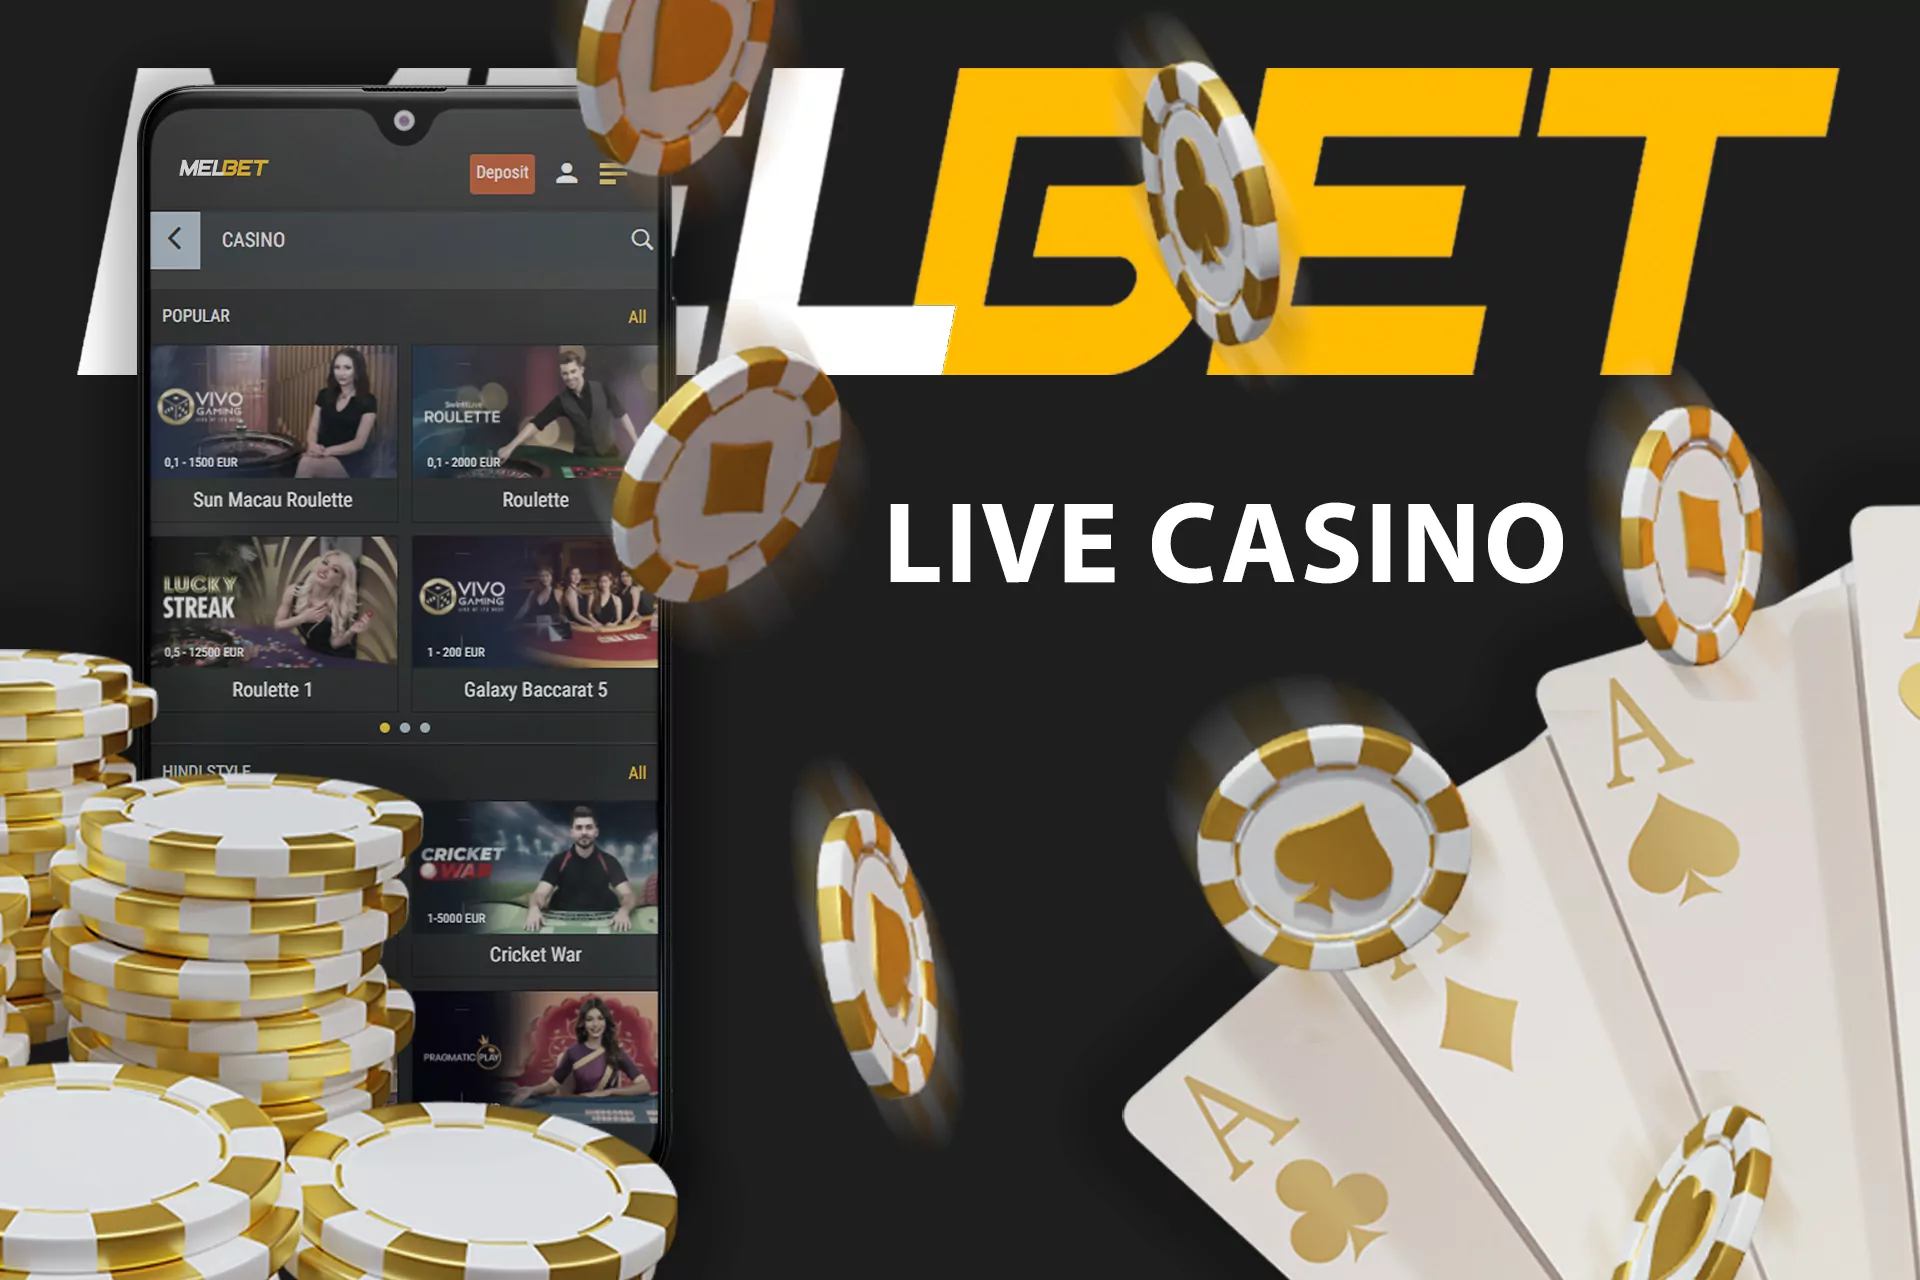 Play live casino games with real dealers in the Melbet app.